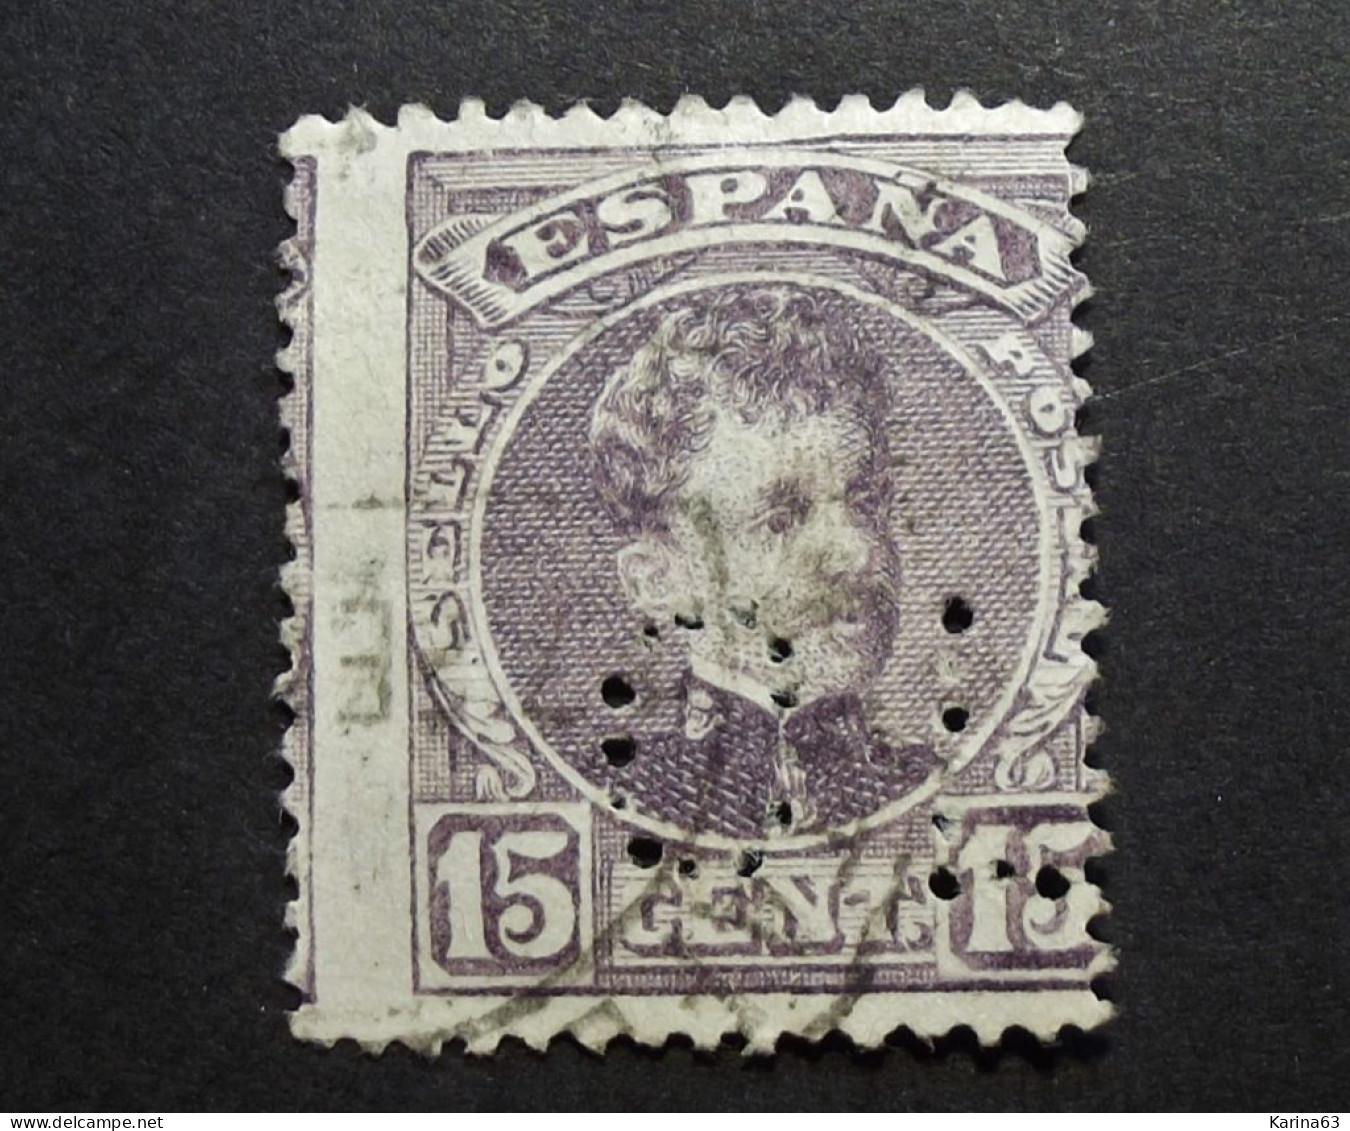 Espana - Spain - Alfonso XIII -  Perfin - Lochung  With Number - C L - Credito Lyones - Cancelled - Oblitérés